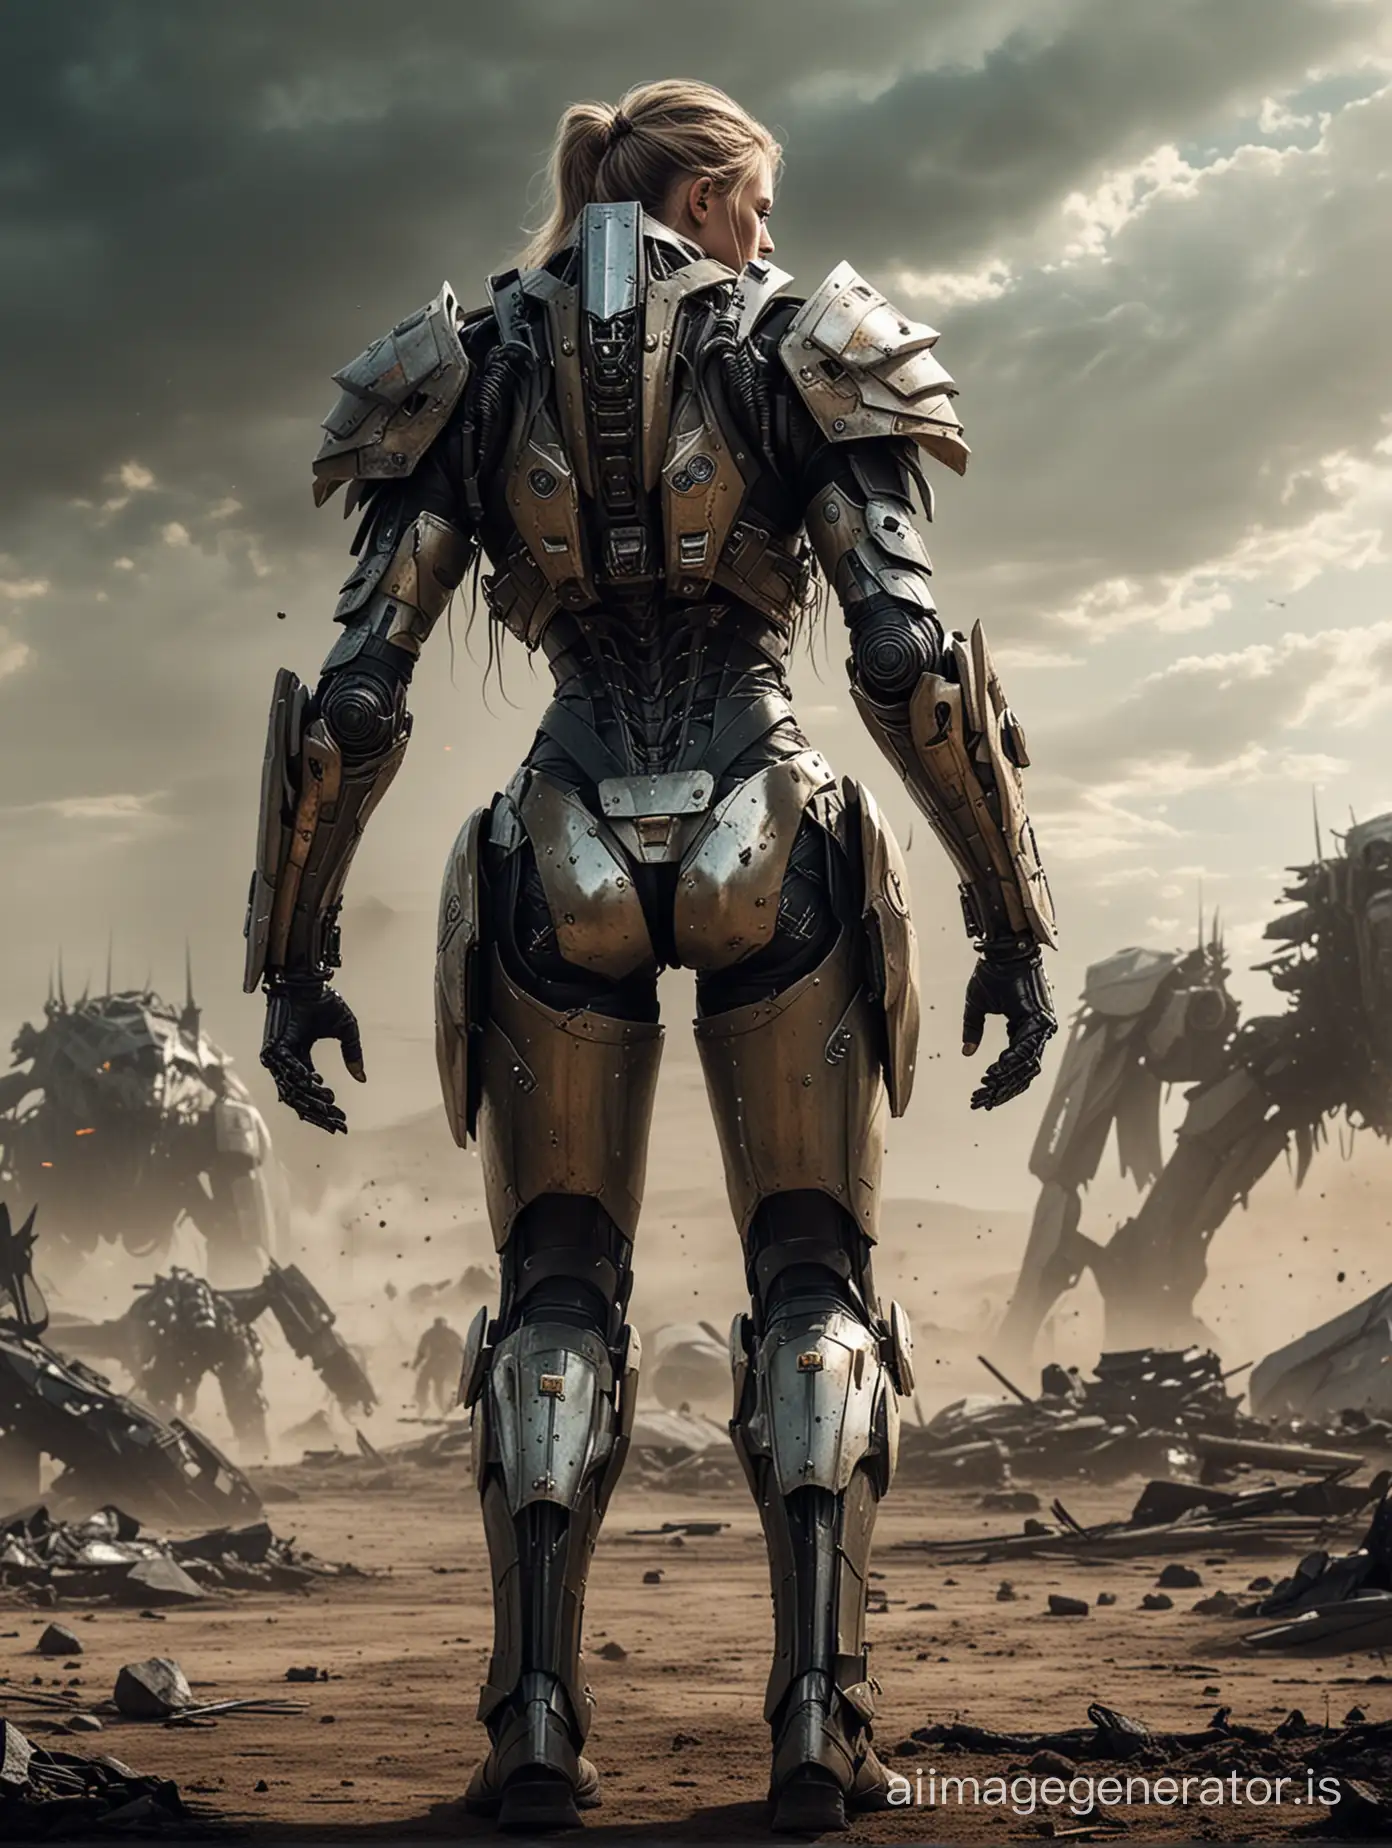 Picture taken from behind. combining sci-fi and tolkien-like fantasy: The fighter, standing, exhausted, on the battlefield. Her skimpy, robotic enhanced, armor dirty. The monsters she just killed lie around her, slain.